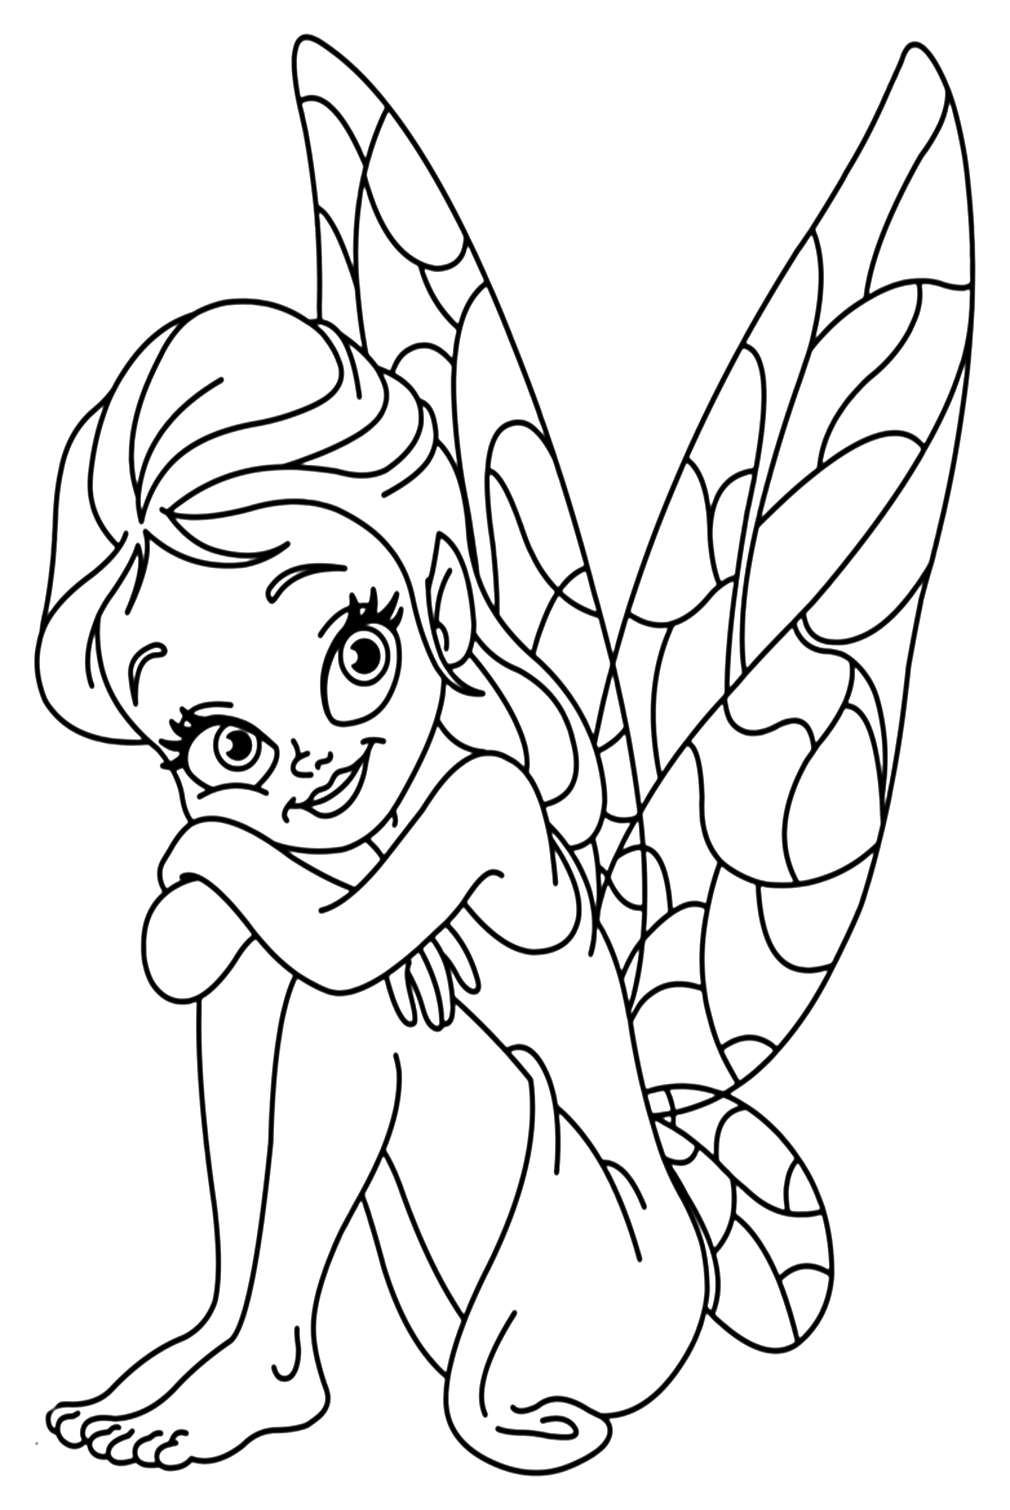 Fairy to Color